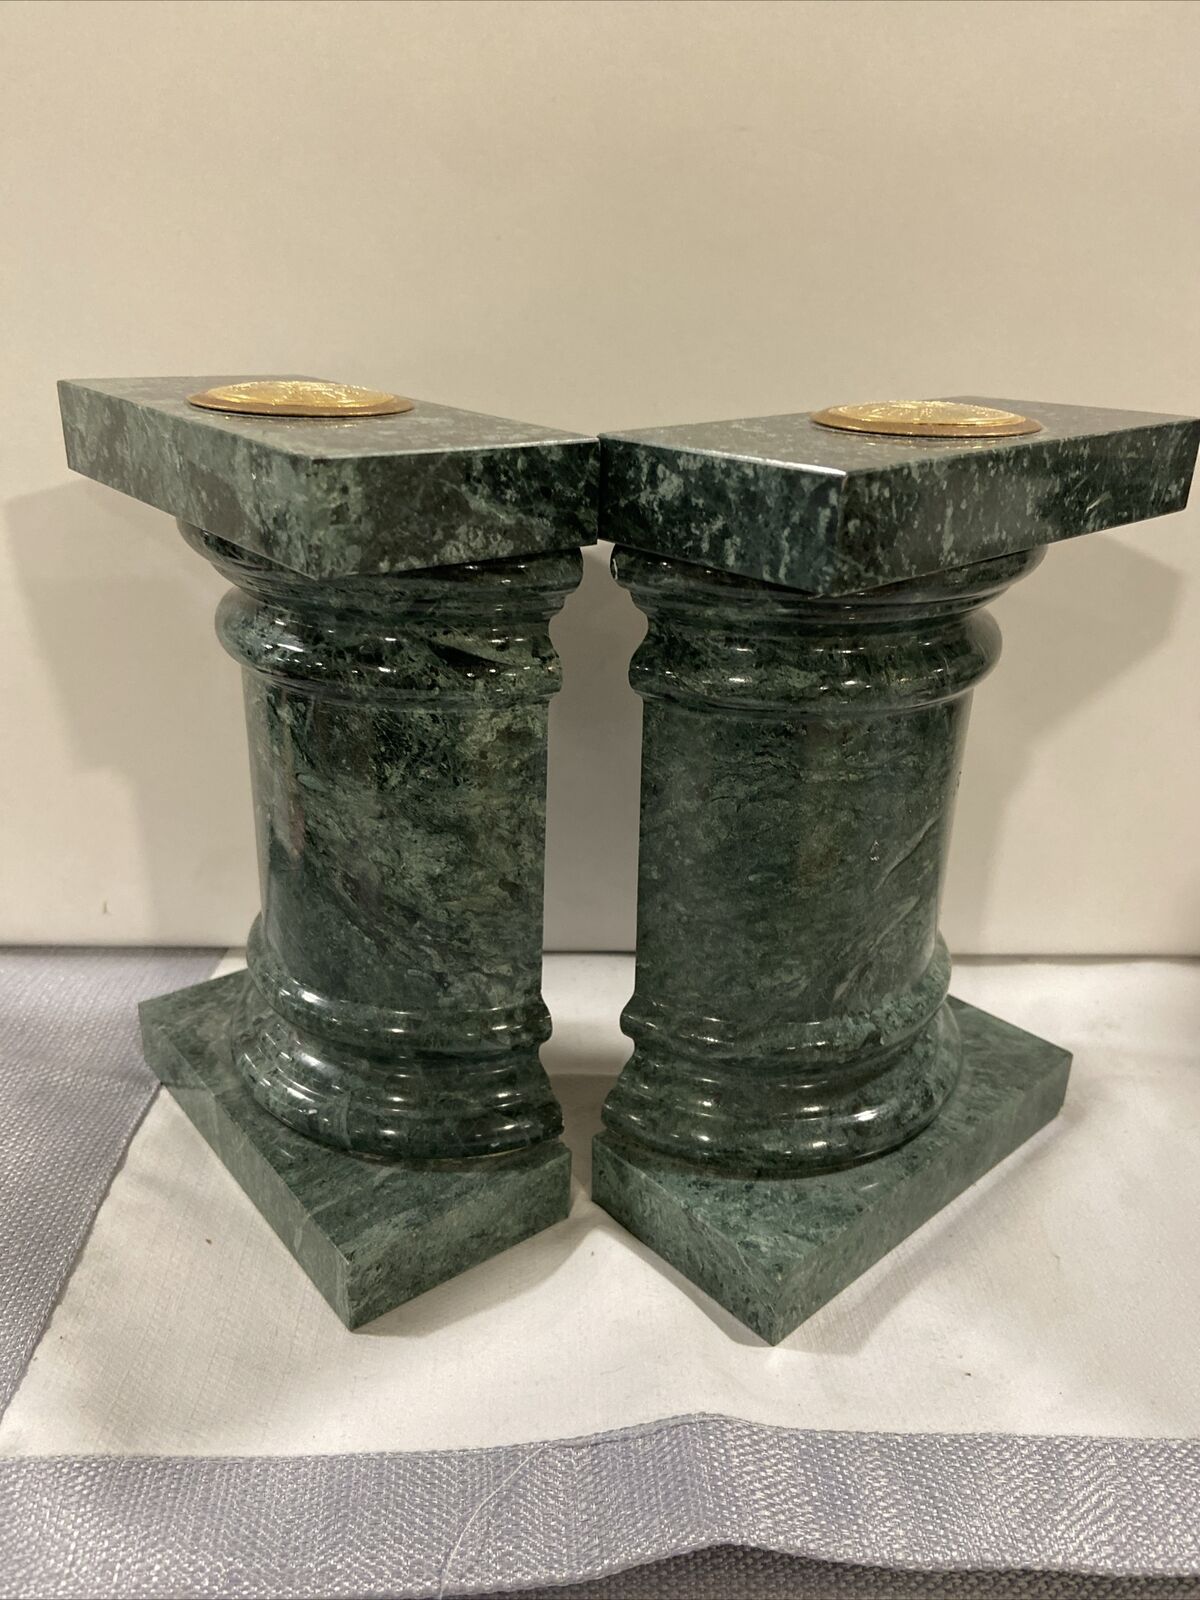 Solid Green Marble Pillars / Columns Bookends With Medallion Presidents Club